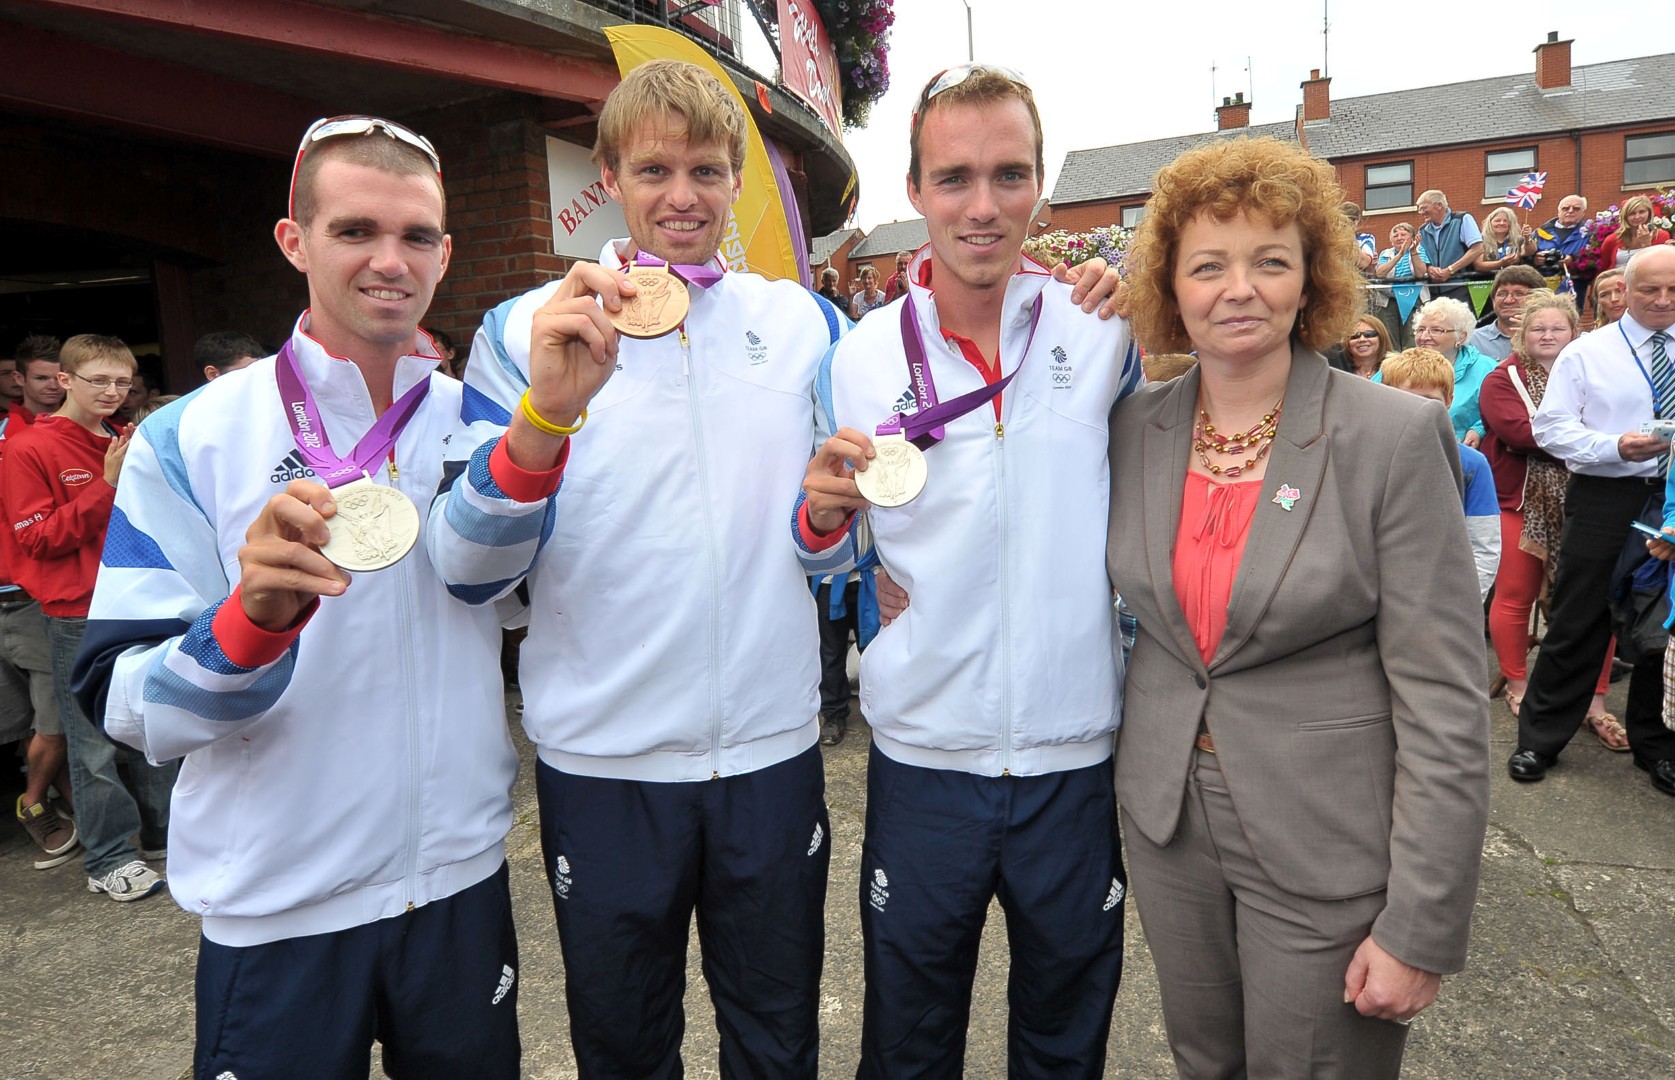 Alan Lewis - PhotopressBelfast.co.uk         15/8/2012
Mandatory Credit - Picture by Justin Kernoghan
A heroes welcome home from Bann Rowing Club for Olympic Medalists (L-R) Richard Chambers,  Alan Campbell  and Peter Chambers (Pictured Sports Minister CarÃ¡l NÃ­ ChuilÃ­n)  - Northern Ireland's Olympic medal-winning rowers are receiving a heroes' welcome in their hometown of Coleraine.Team GB rowers Richard and Peter Chambers took silver in the lightweight fours, while Alan Campbell won a bronze in the single sculls.They have returned to Bann Rowing Club where they honed their rowing skills.Sports Minister CarÃ¡l NÃ­ ChuilÃ­n said their "achievement really does transcend sport and serves as an inspiration to us all".The celebrations will continue with an appearance in the town centre at about 15:00 BST.The three men were cheered by supporters at Belfast City Airport as they arrived back in Northern Ireland on Wednesday morning.